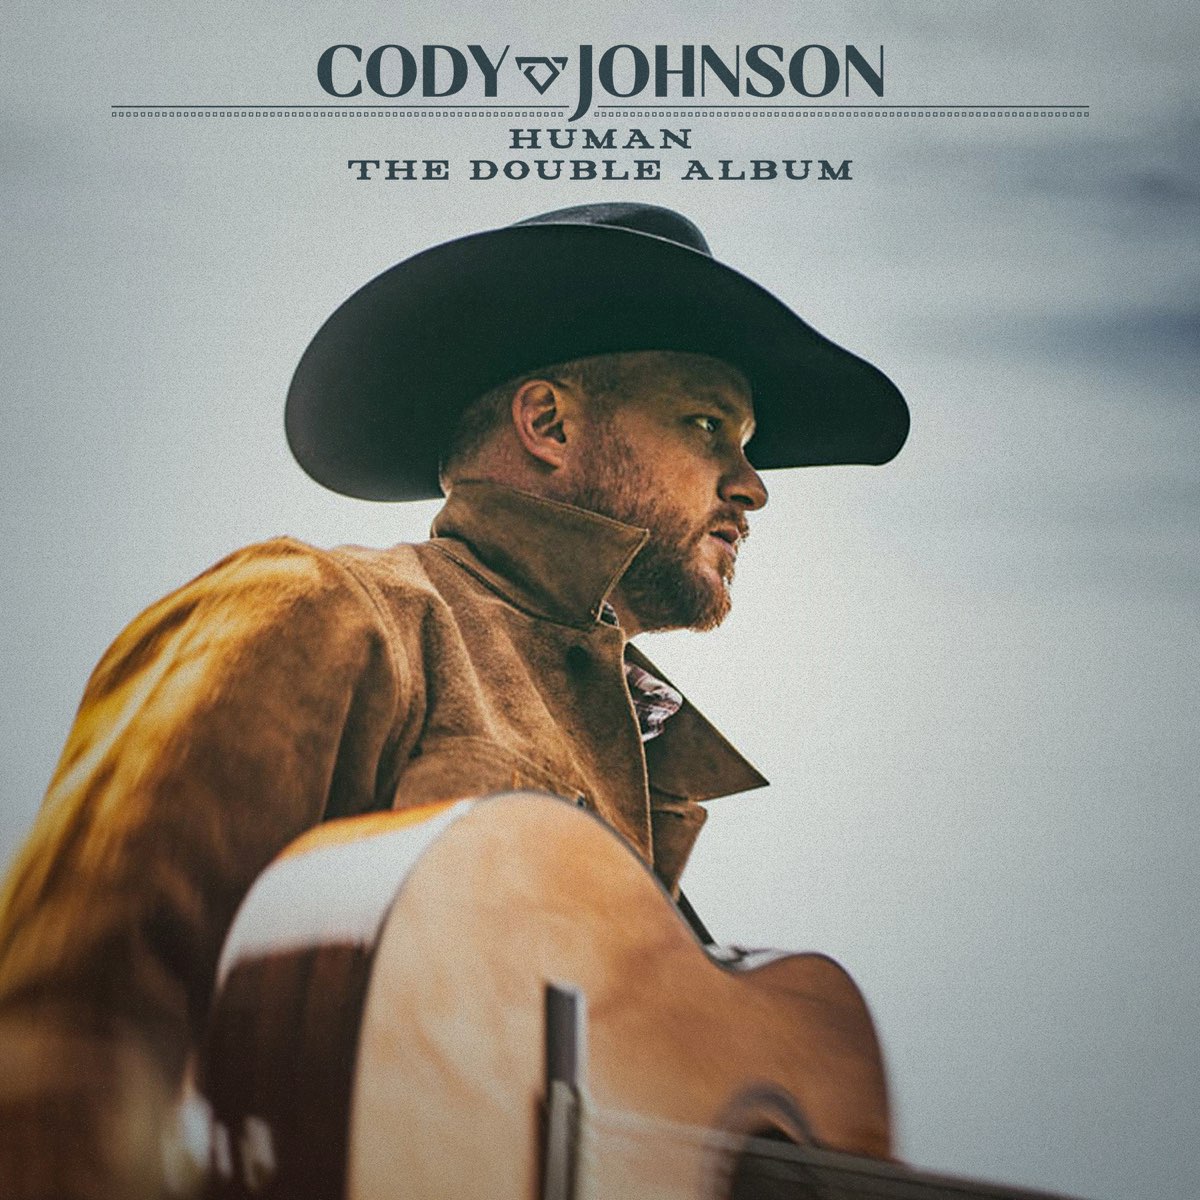 ‎Human The Double Album by Cody Johnson on Apple Music